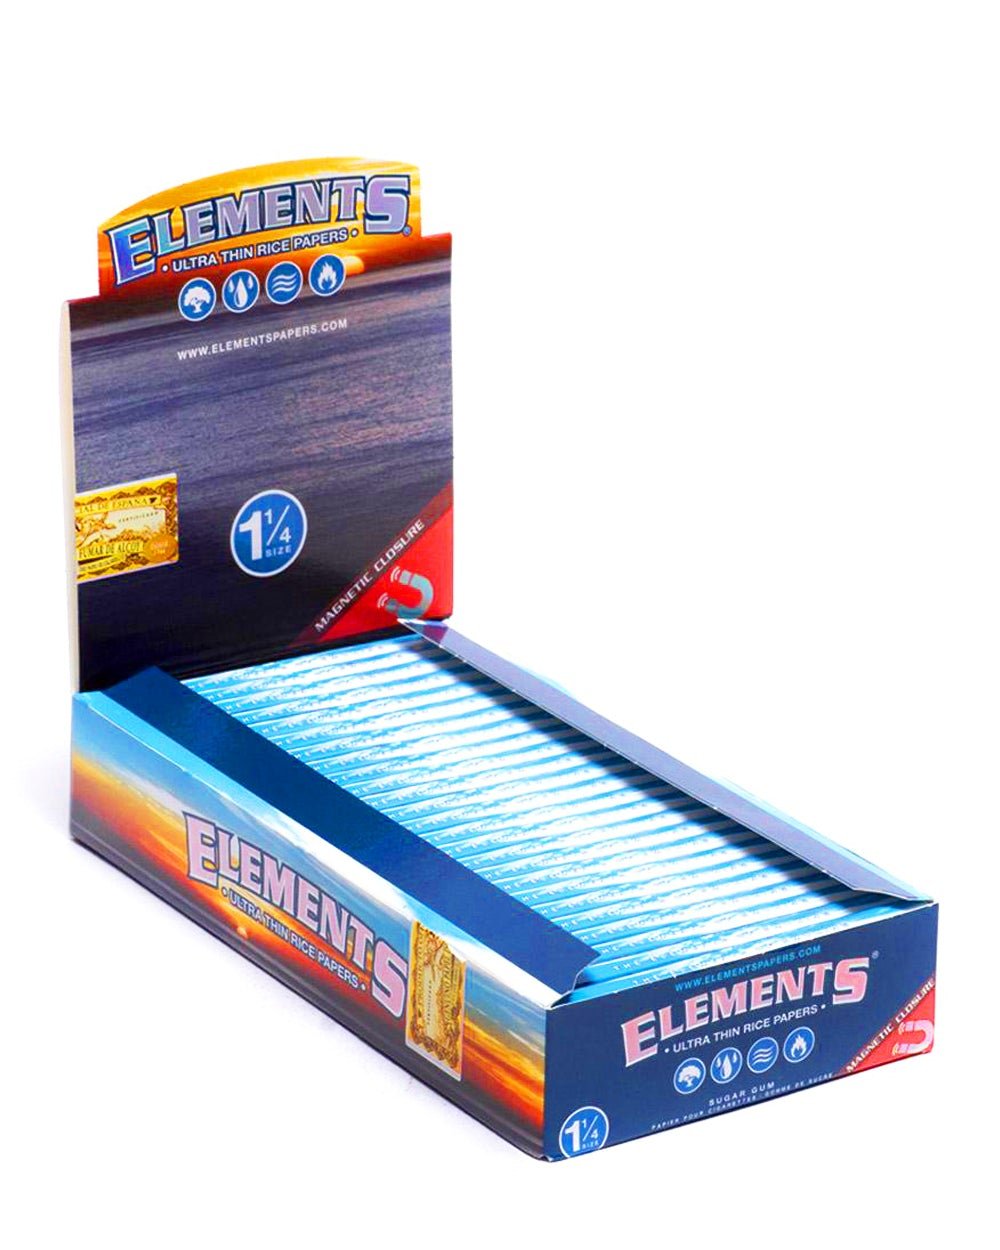 ELEMENTS | 'Retail Display' 1 1/4 Size Ultra Thin Rolling Papers | 83mm - Rice Paper - 25 Count - 1